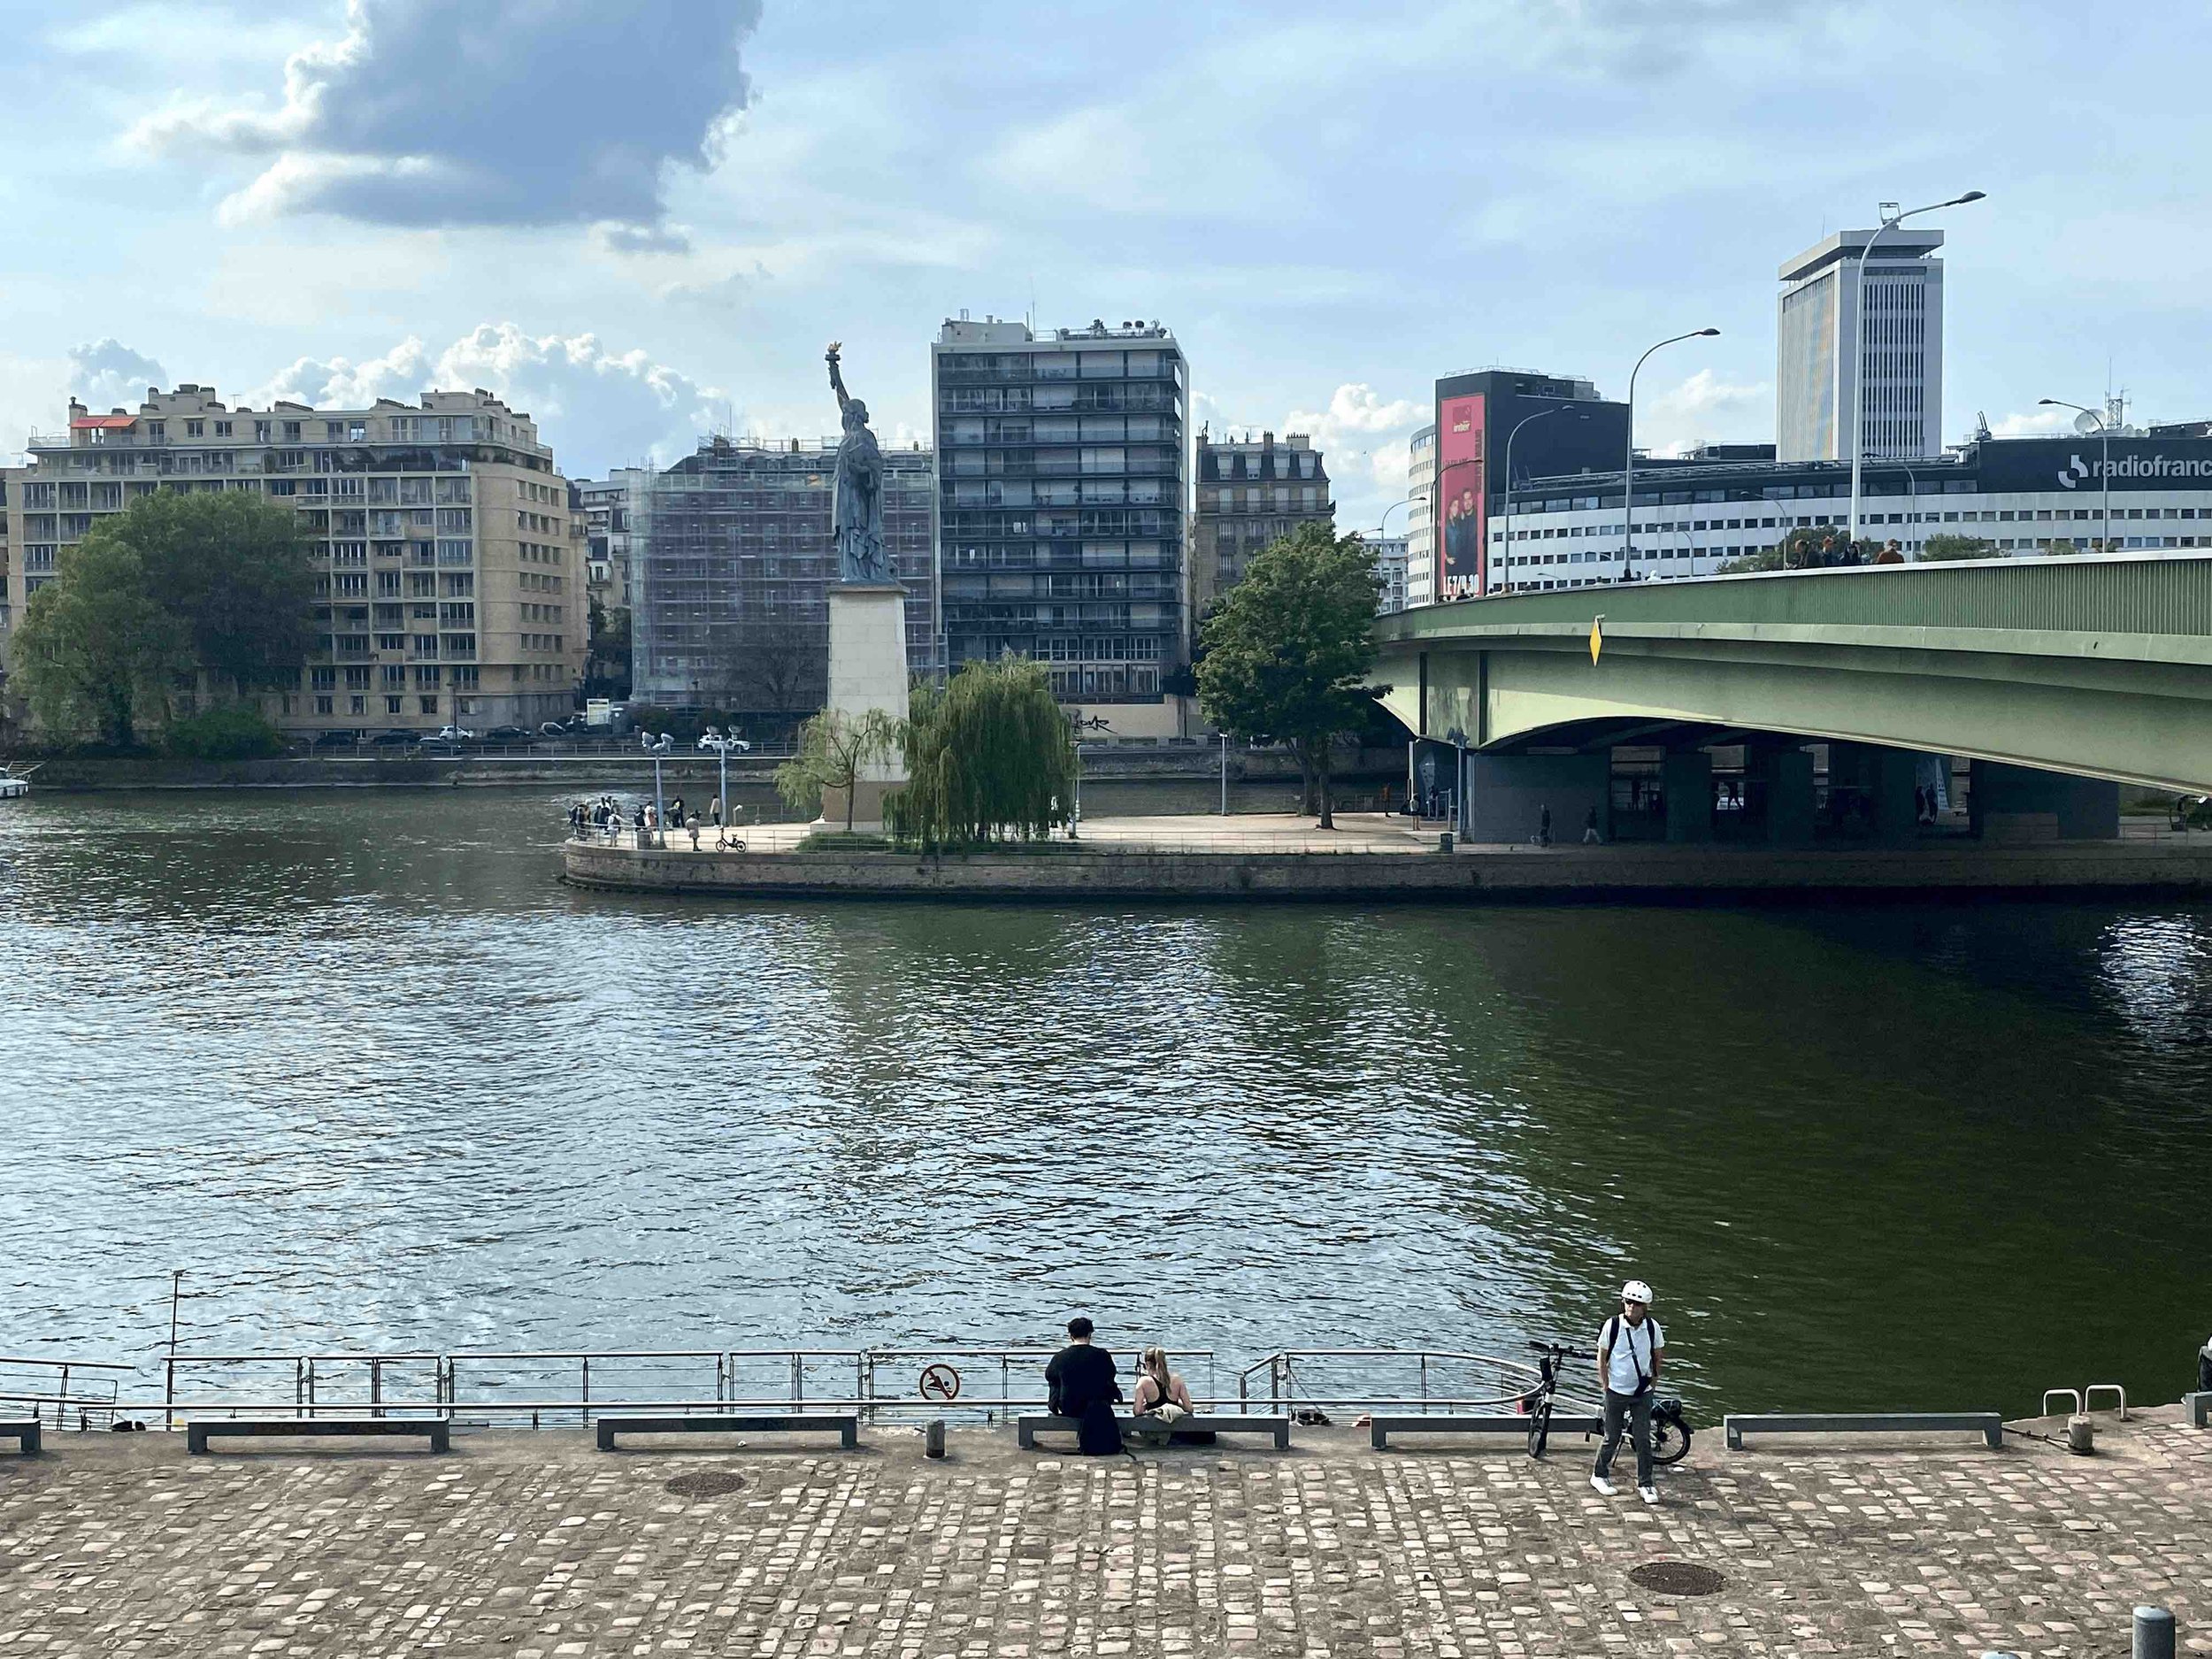  The Port Javel riverfront walkway provides a direct view of the 22-meter-high replica of the Statue of Liberty in France, situated on Île aux Cygnes, a small man-made island in the River Seine directly connected by the Pont de Grenelle bridge. This 